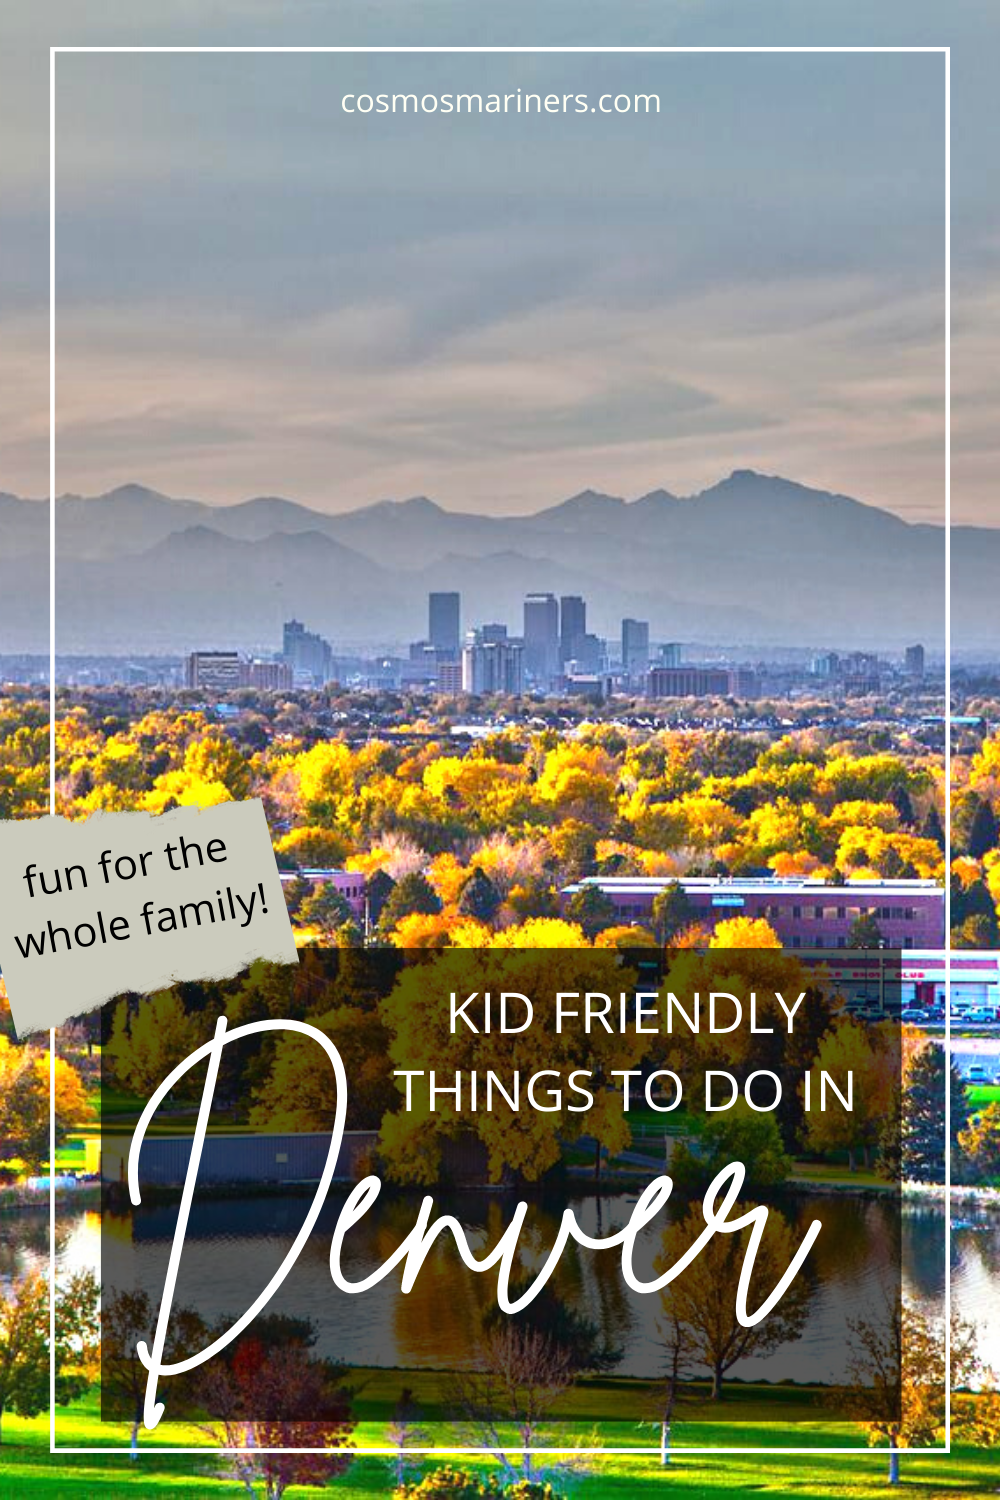 Things to Do in Denver with Kids